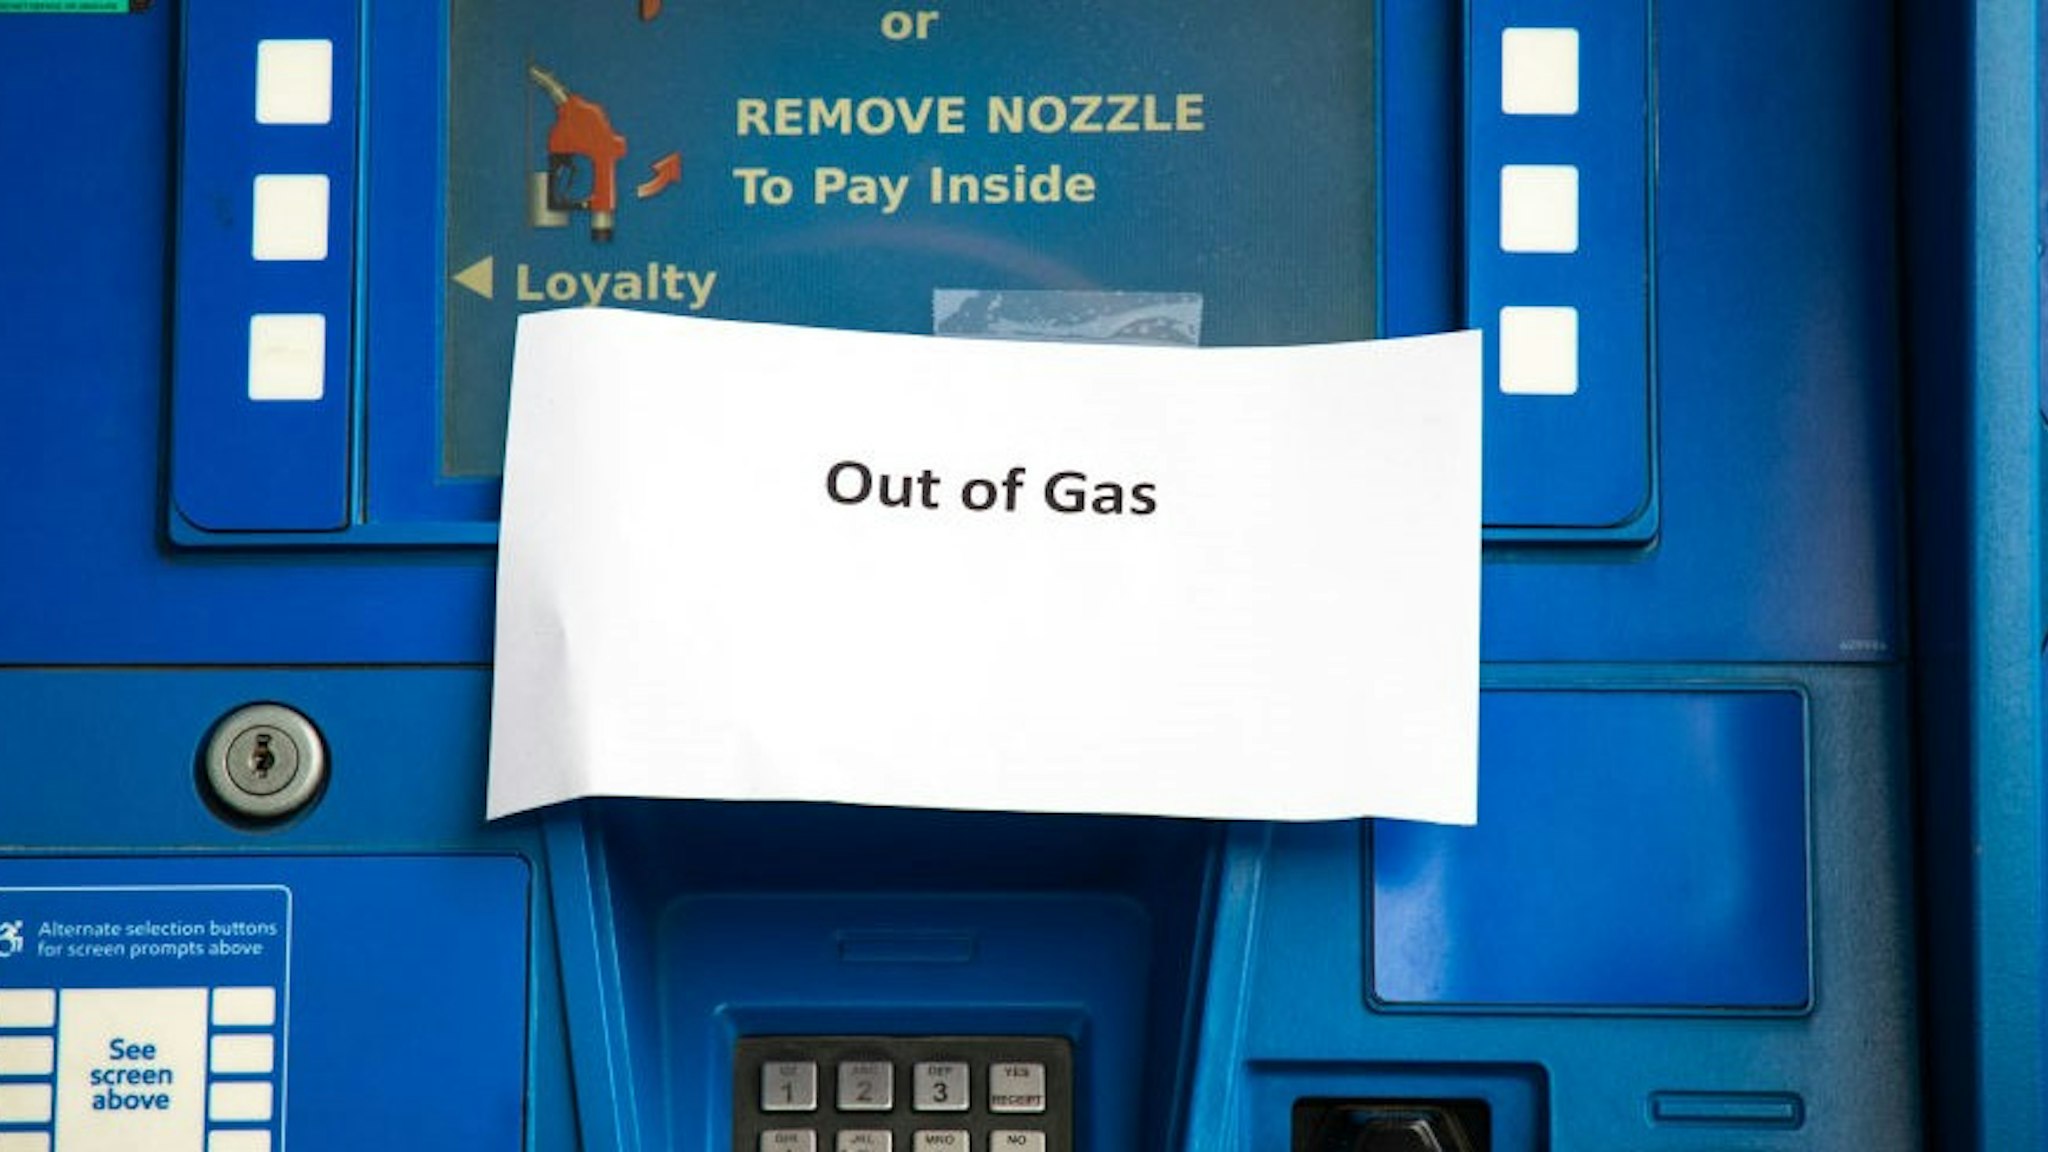 Notes are left on gas pumps to let motorists know the pumps are empty at an Exxon gas station in Charlotte, North Carolina on May 12, 2021. - Fears the shutdown of the Colonial Pipeline because of a cyberattack would cause a gasoline shortage led to some panic buying and prompted US regulators on May 11, 2021 to temporarily suspend clean fuel requirements in three eastern states and the nation's capital. (Photo by Logan Cyrus / AFP) (Photo by